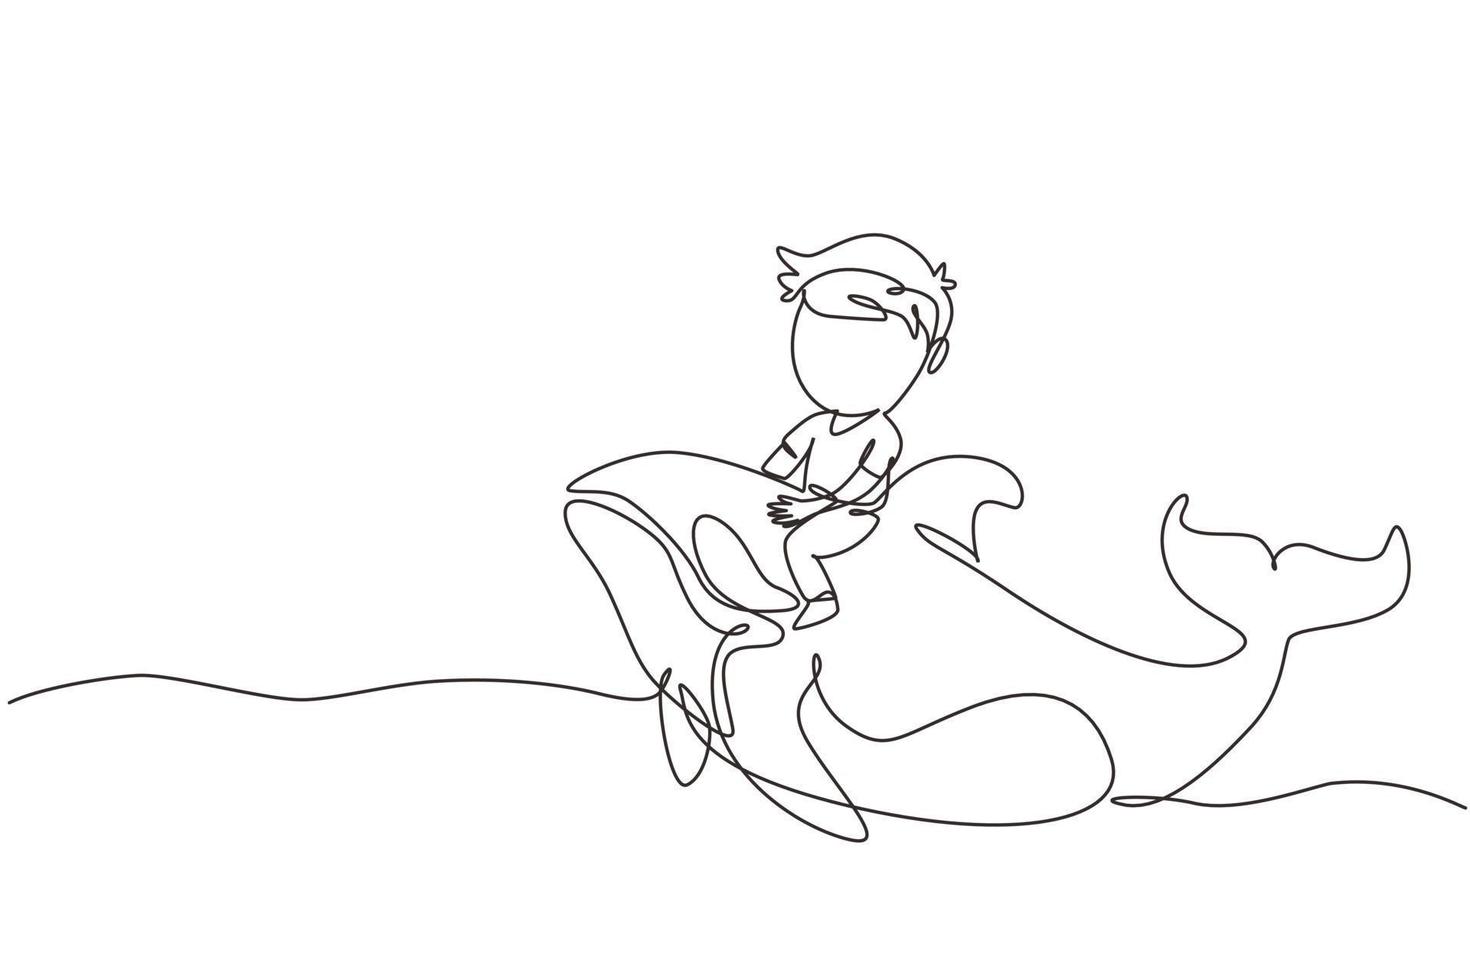 Single one line drawing little boy riding orca. Young kid sitting on back whale killer in swimming pool. Whale killer or orca in water. Modern continuous line draw design graphic vector illustration